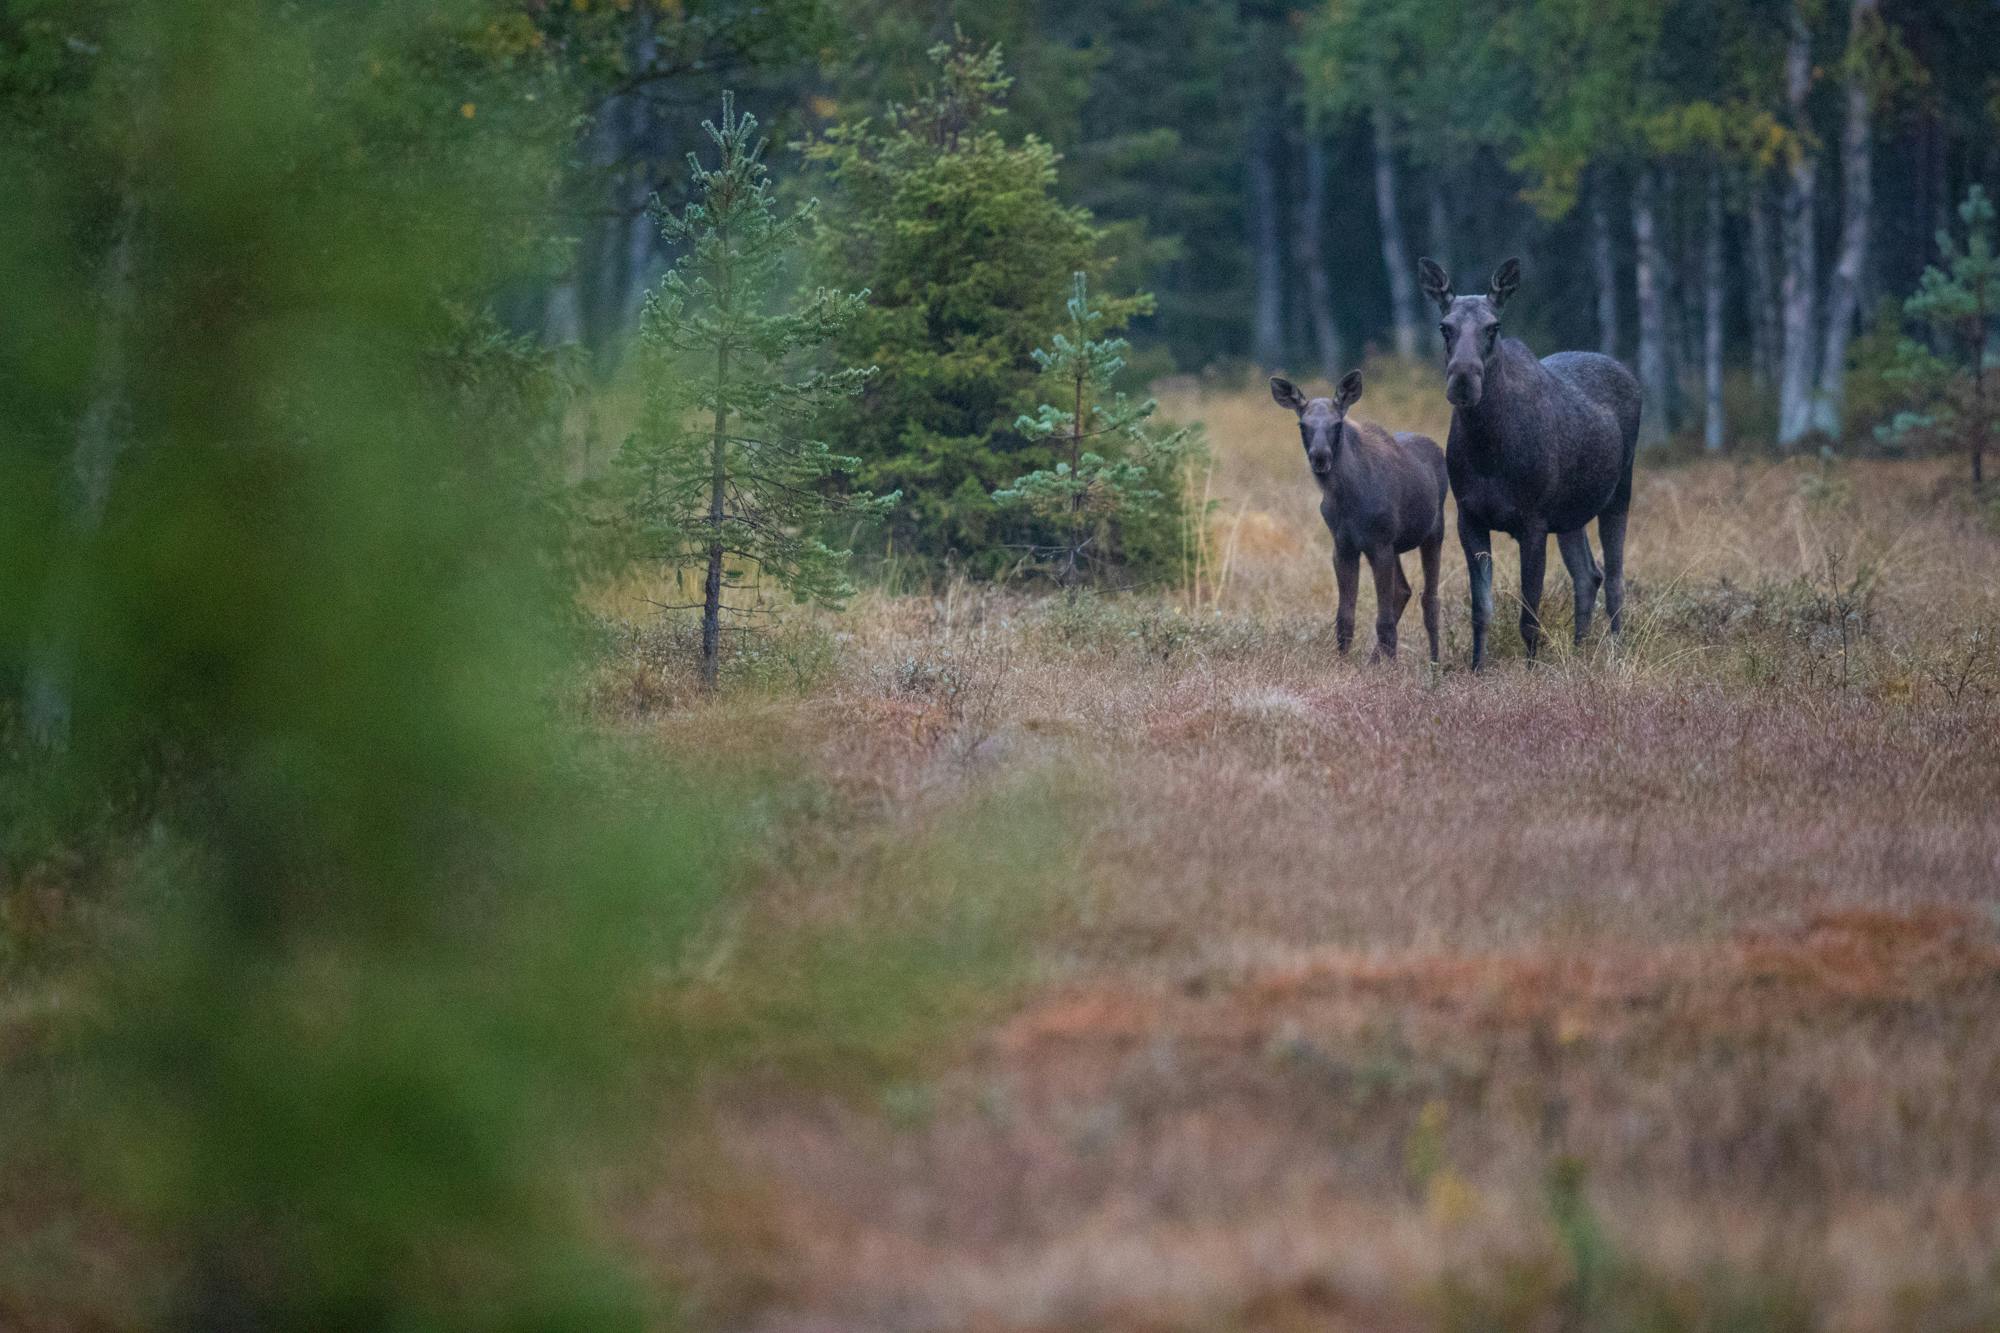 Moose and calf in the distance surrounded by forest, staring back at the moose safari participants.